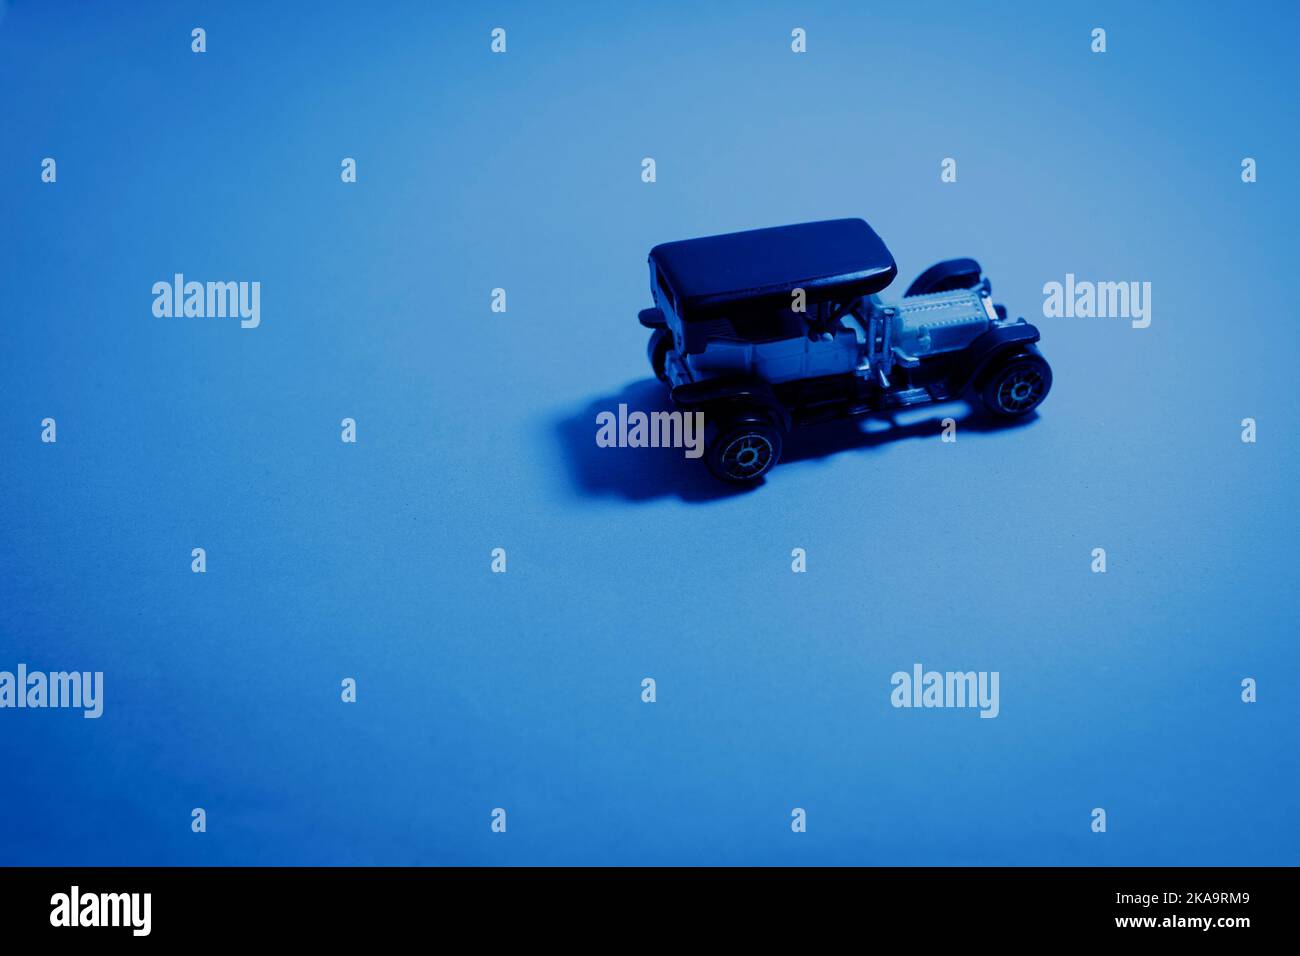 A vintage jeep toy car with a shadow on a table under blue light Stock Photo